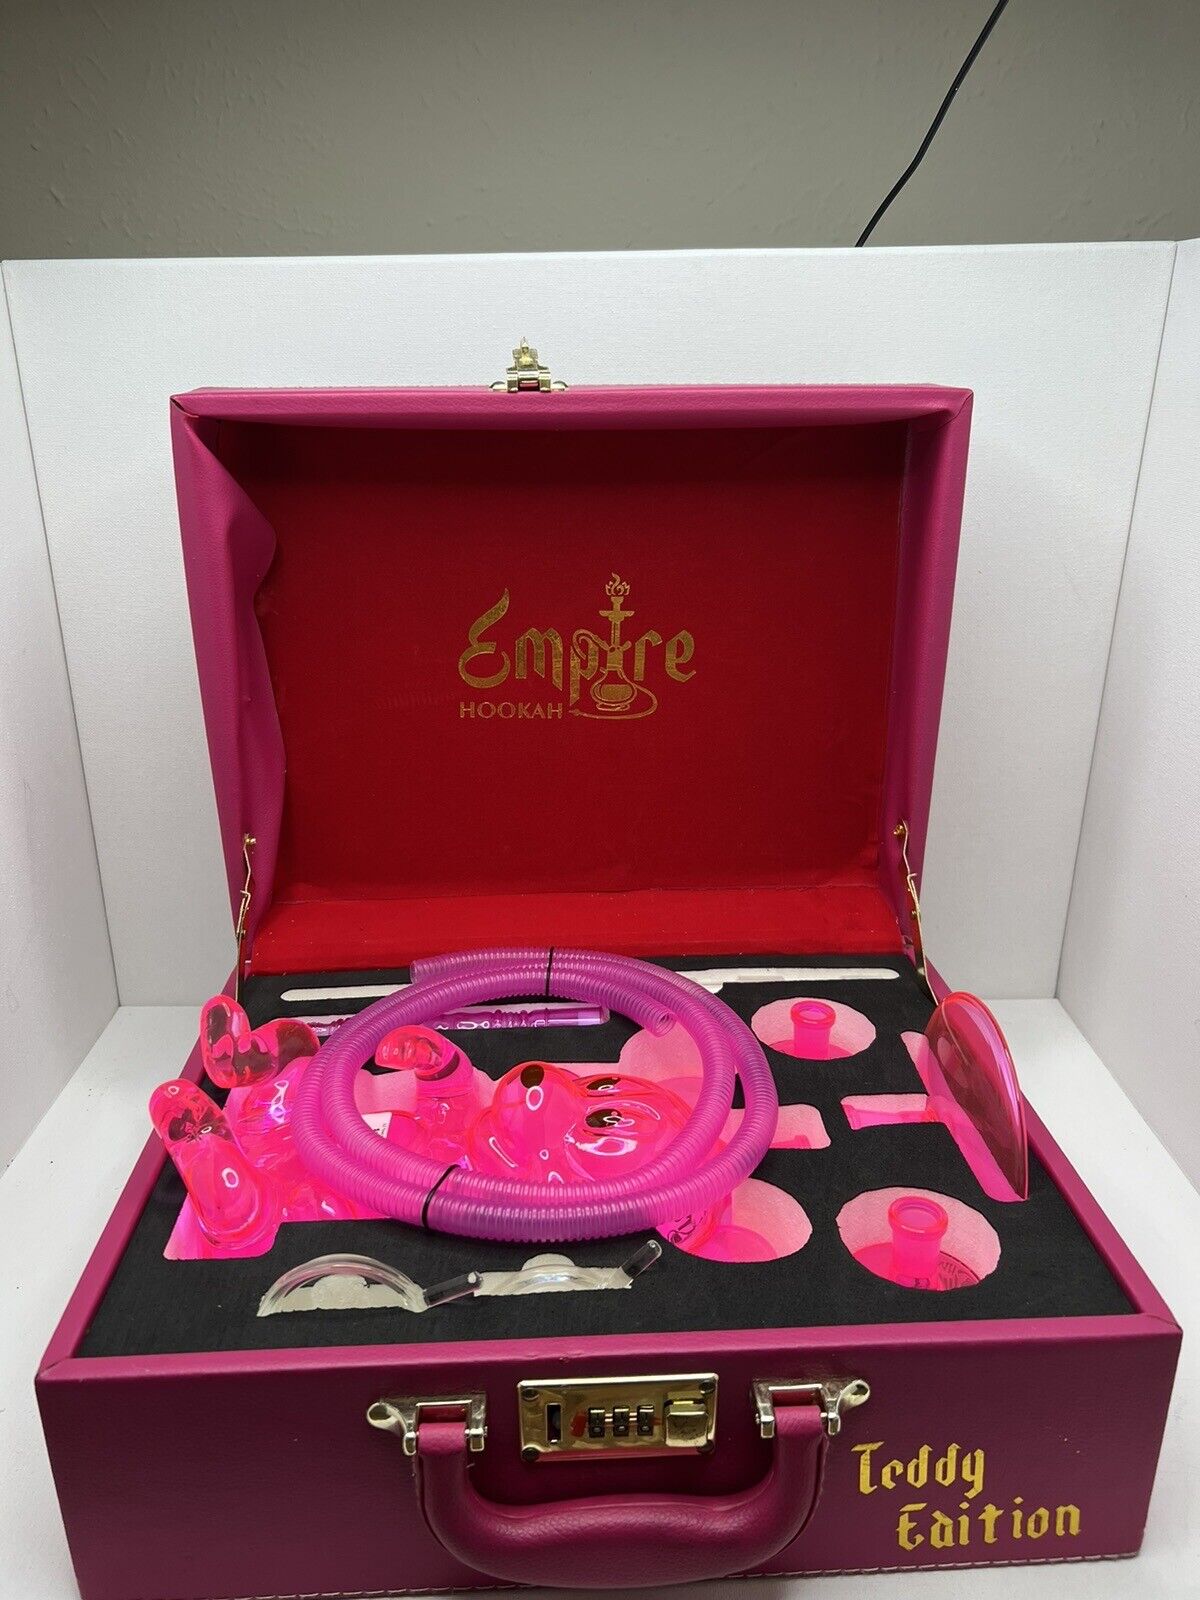 BRAND NEW Empire Hookah with Lockable Case Teddy Edition Pink